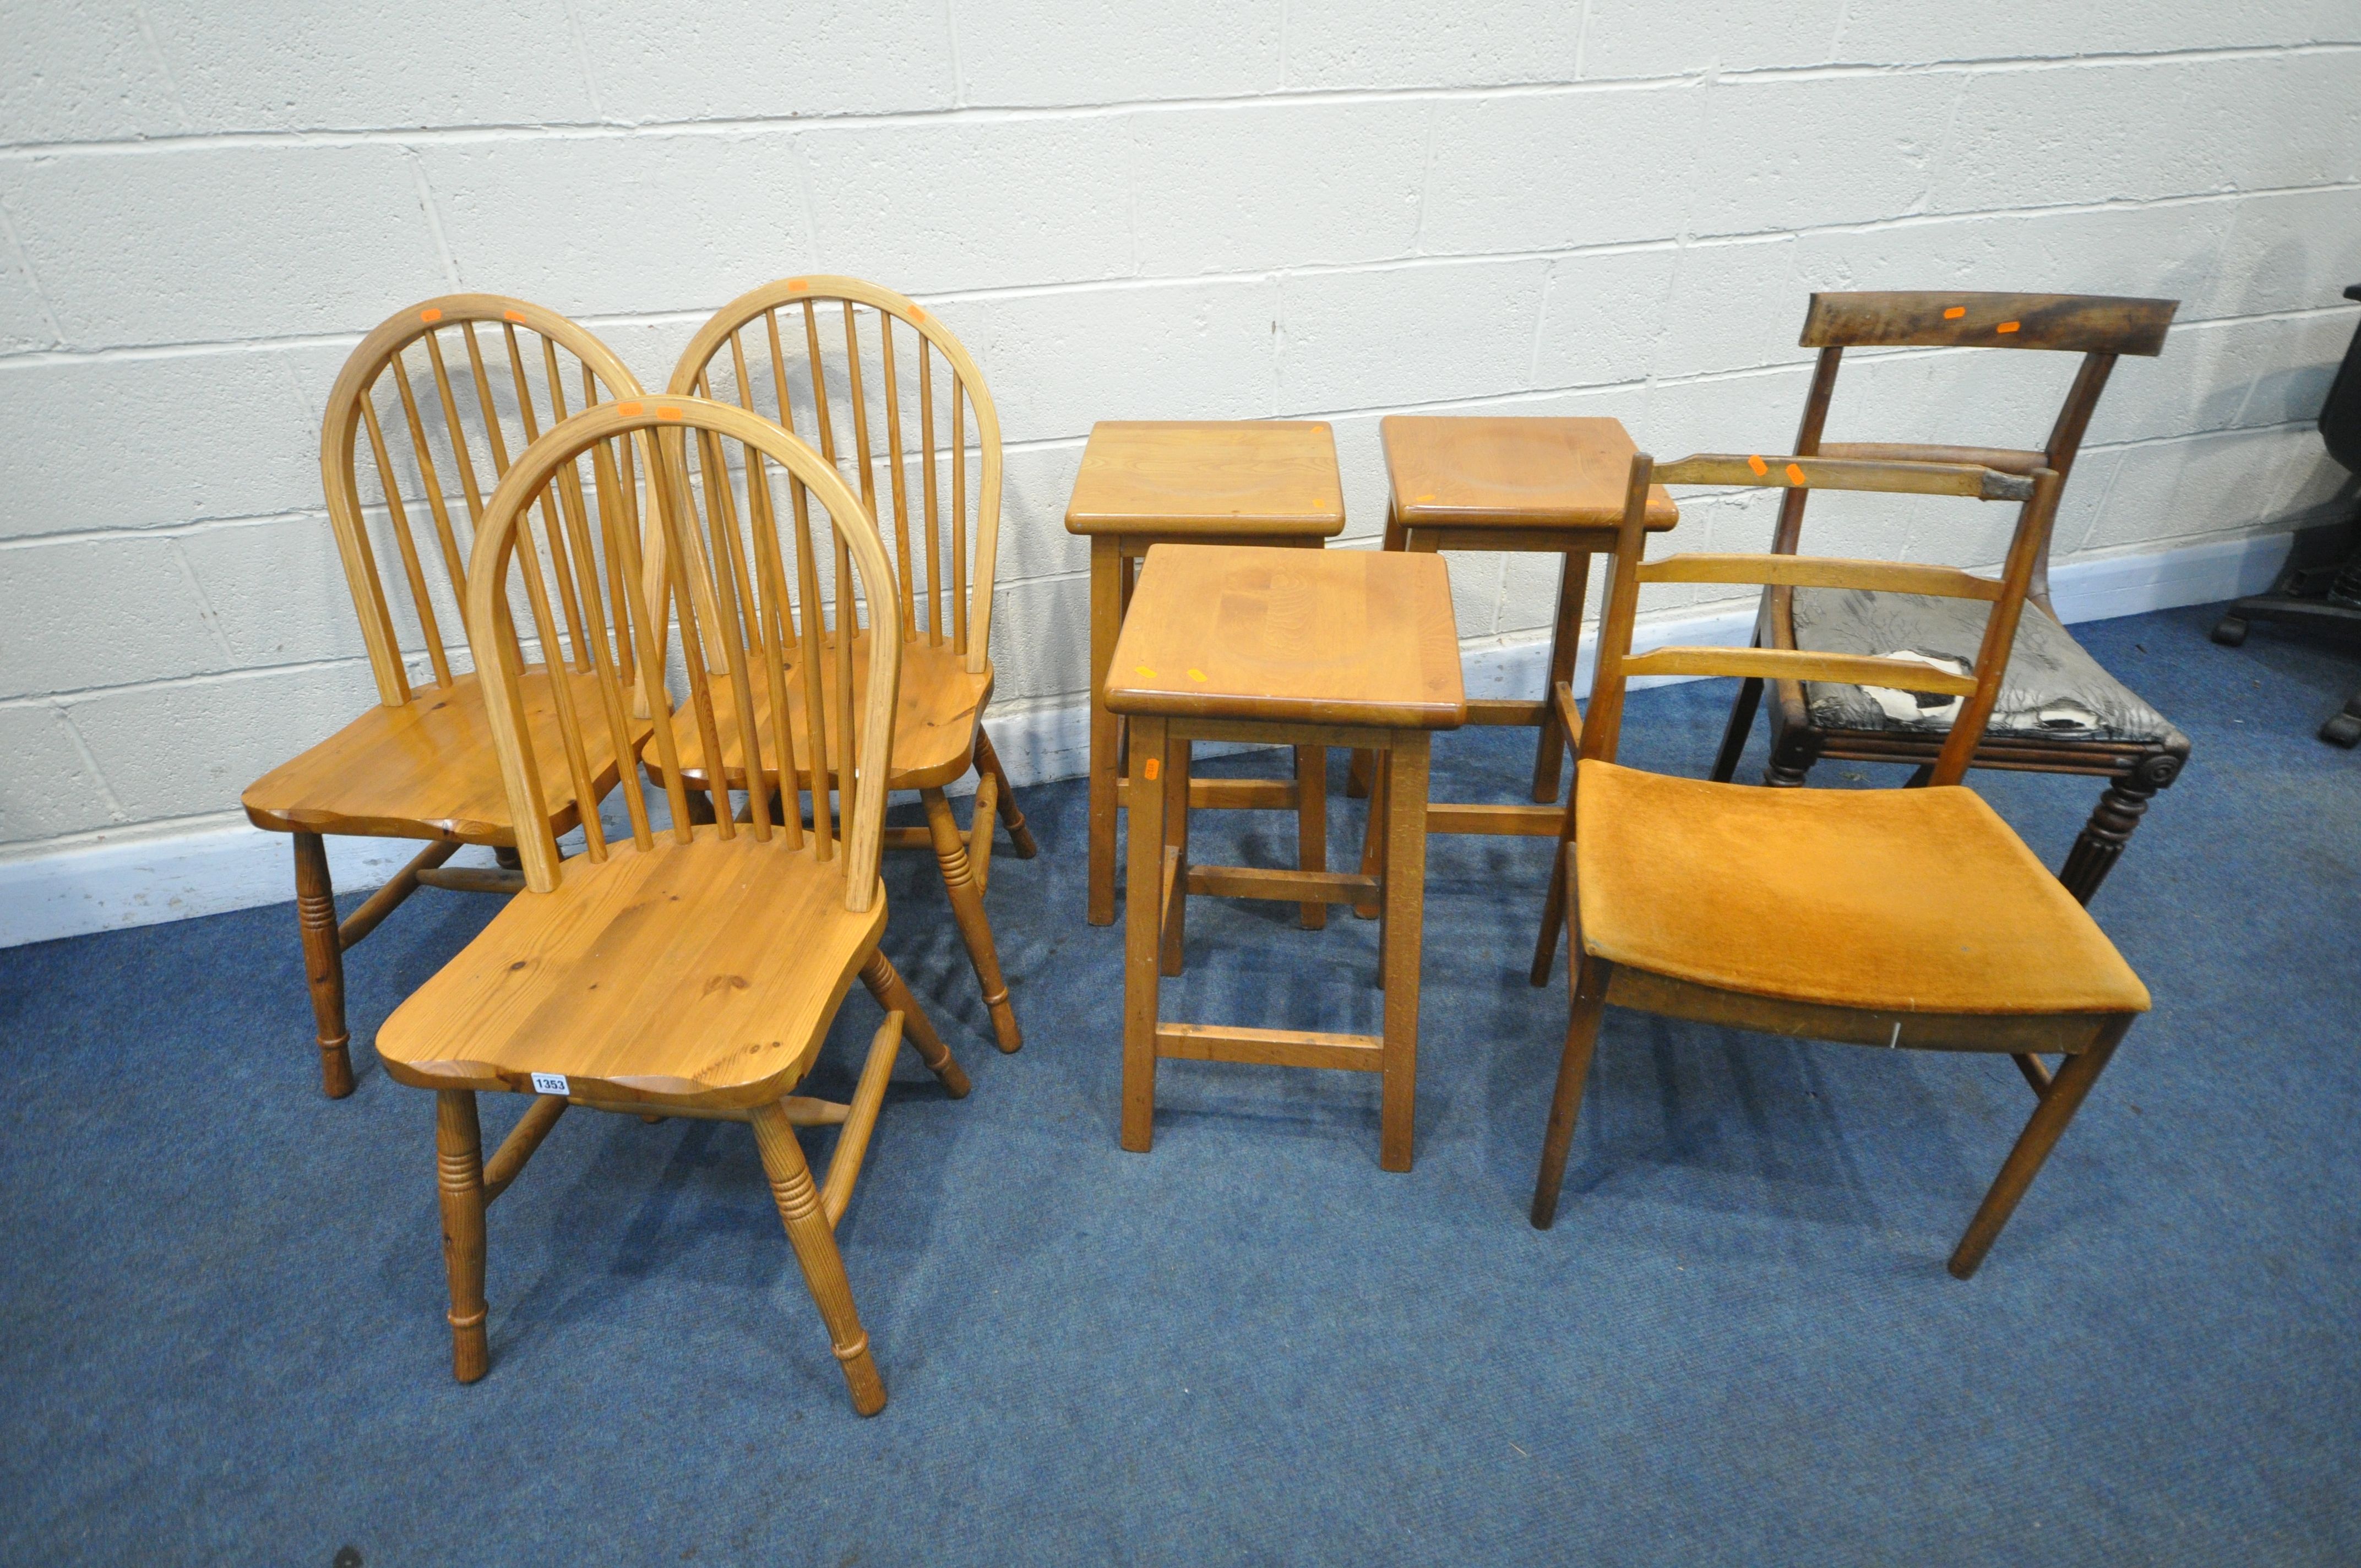 A SELECTION OF CHAIRS AND STOOLS, to include three pine hooped back chairs, three high stools, a